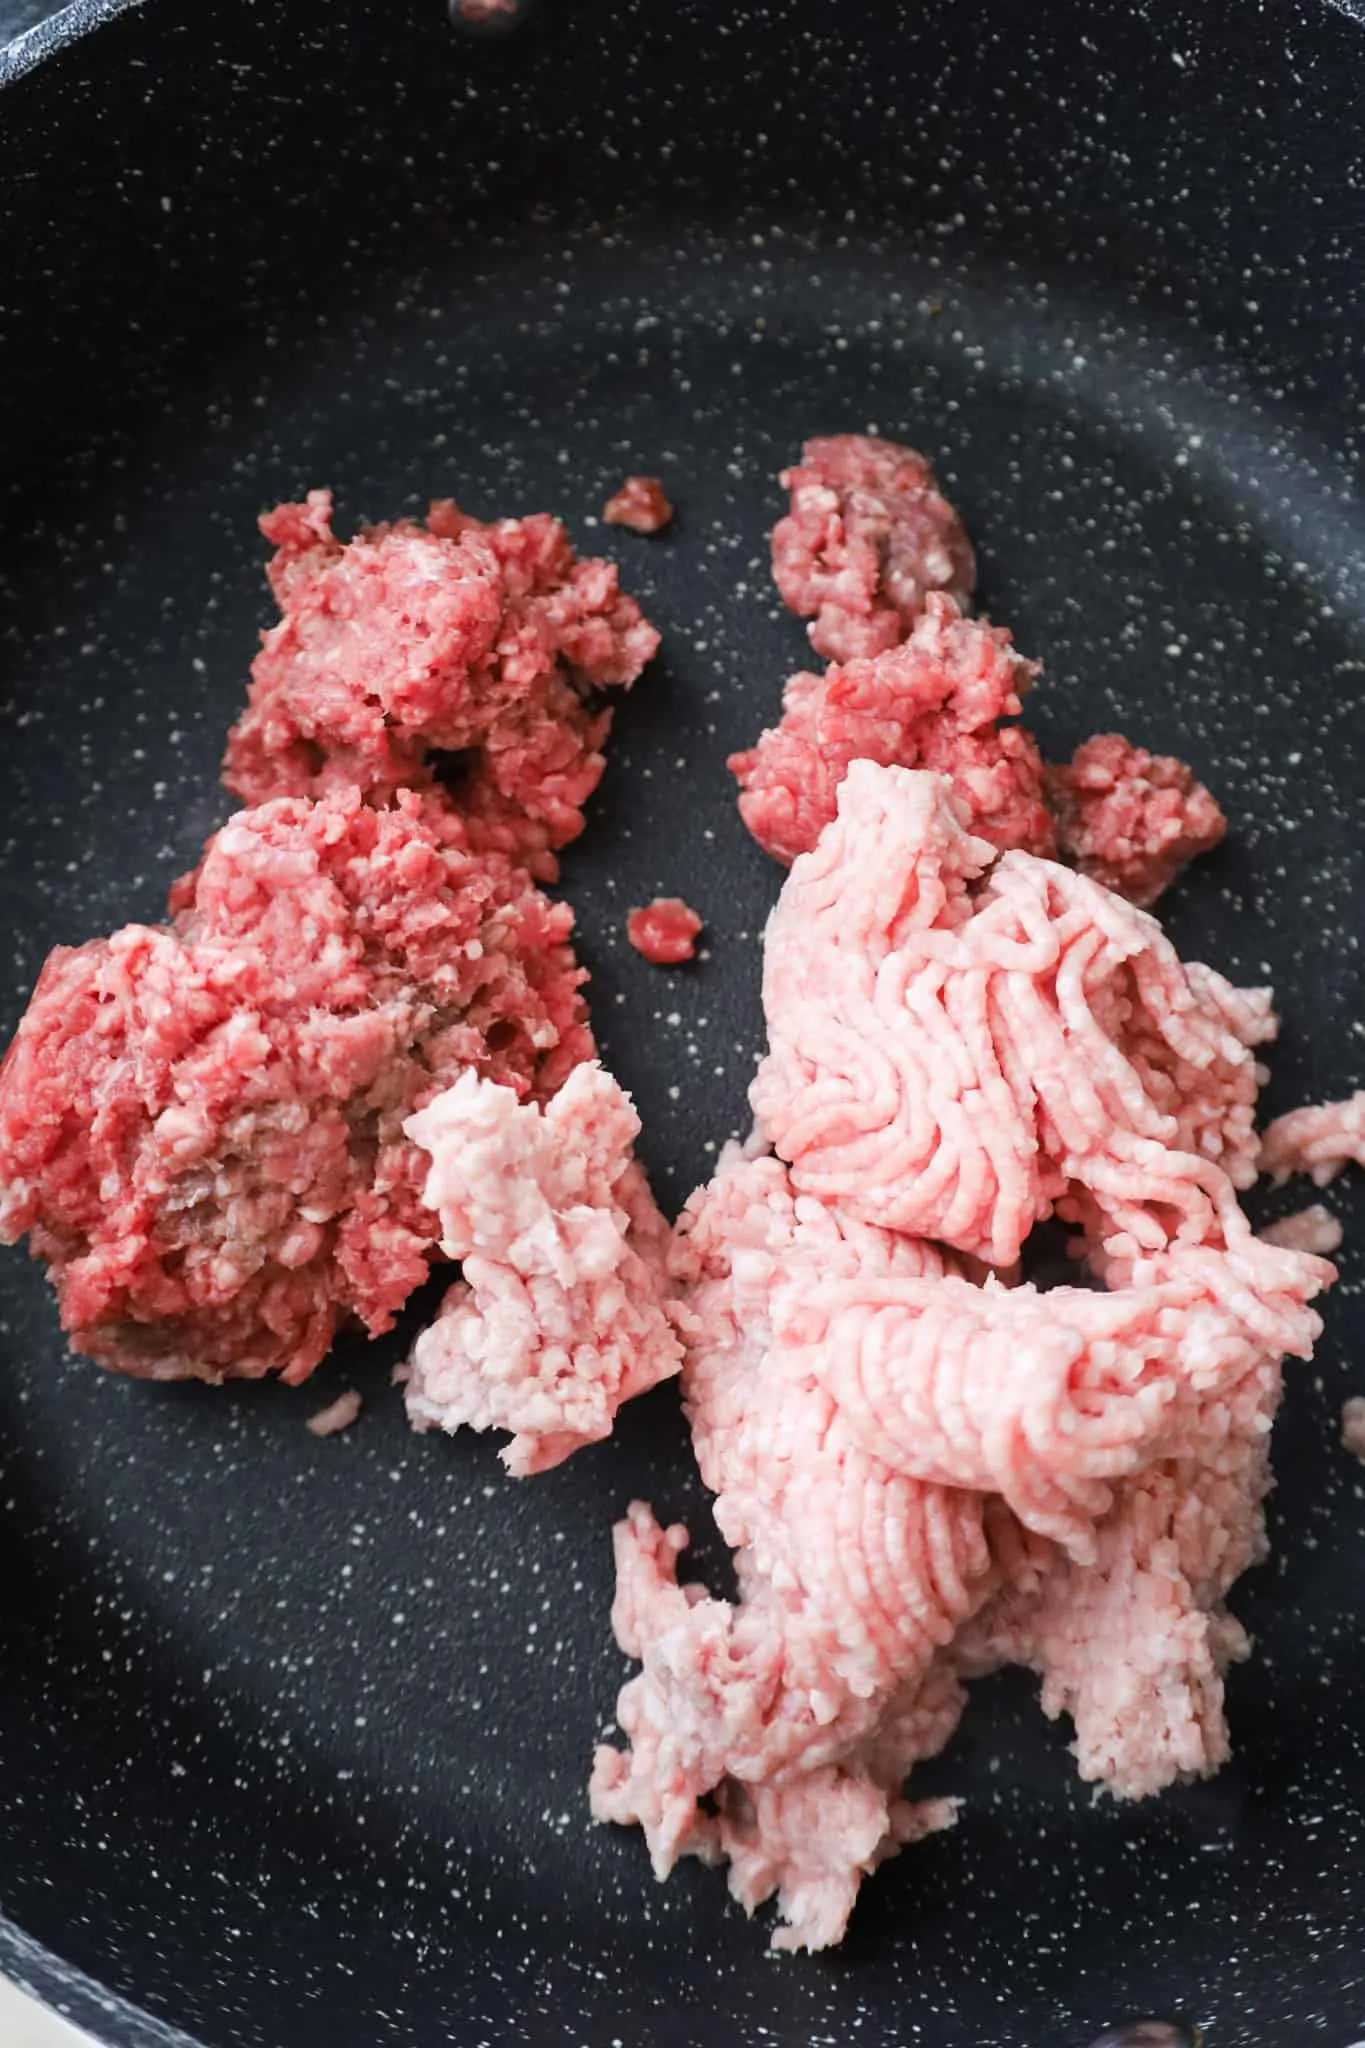 raw ground beef and ground pork in a saute pan